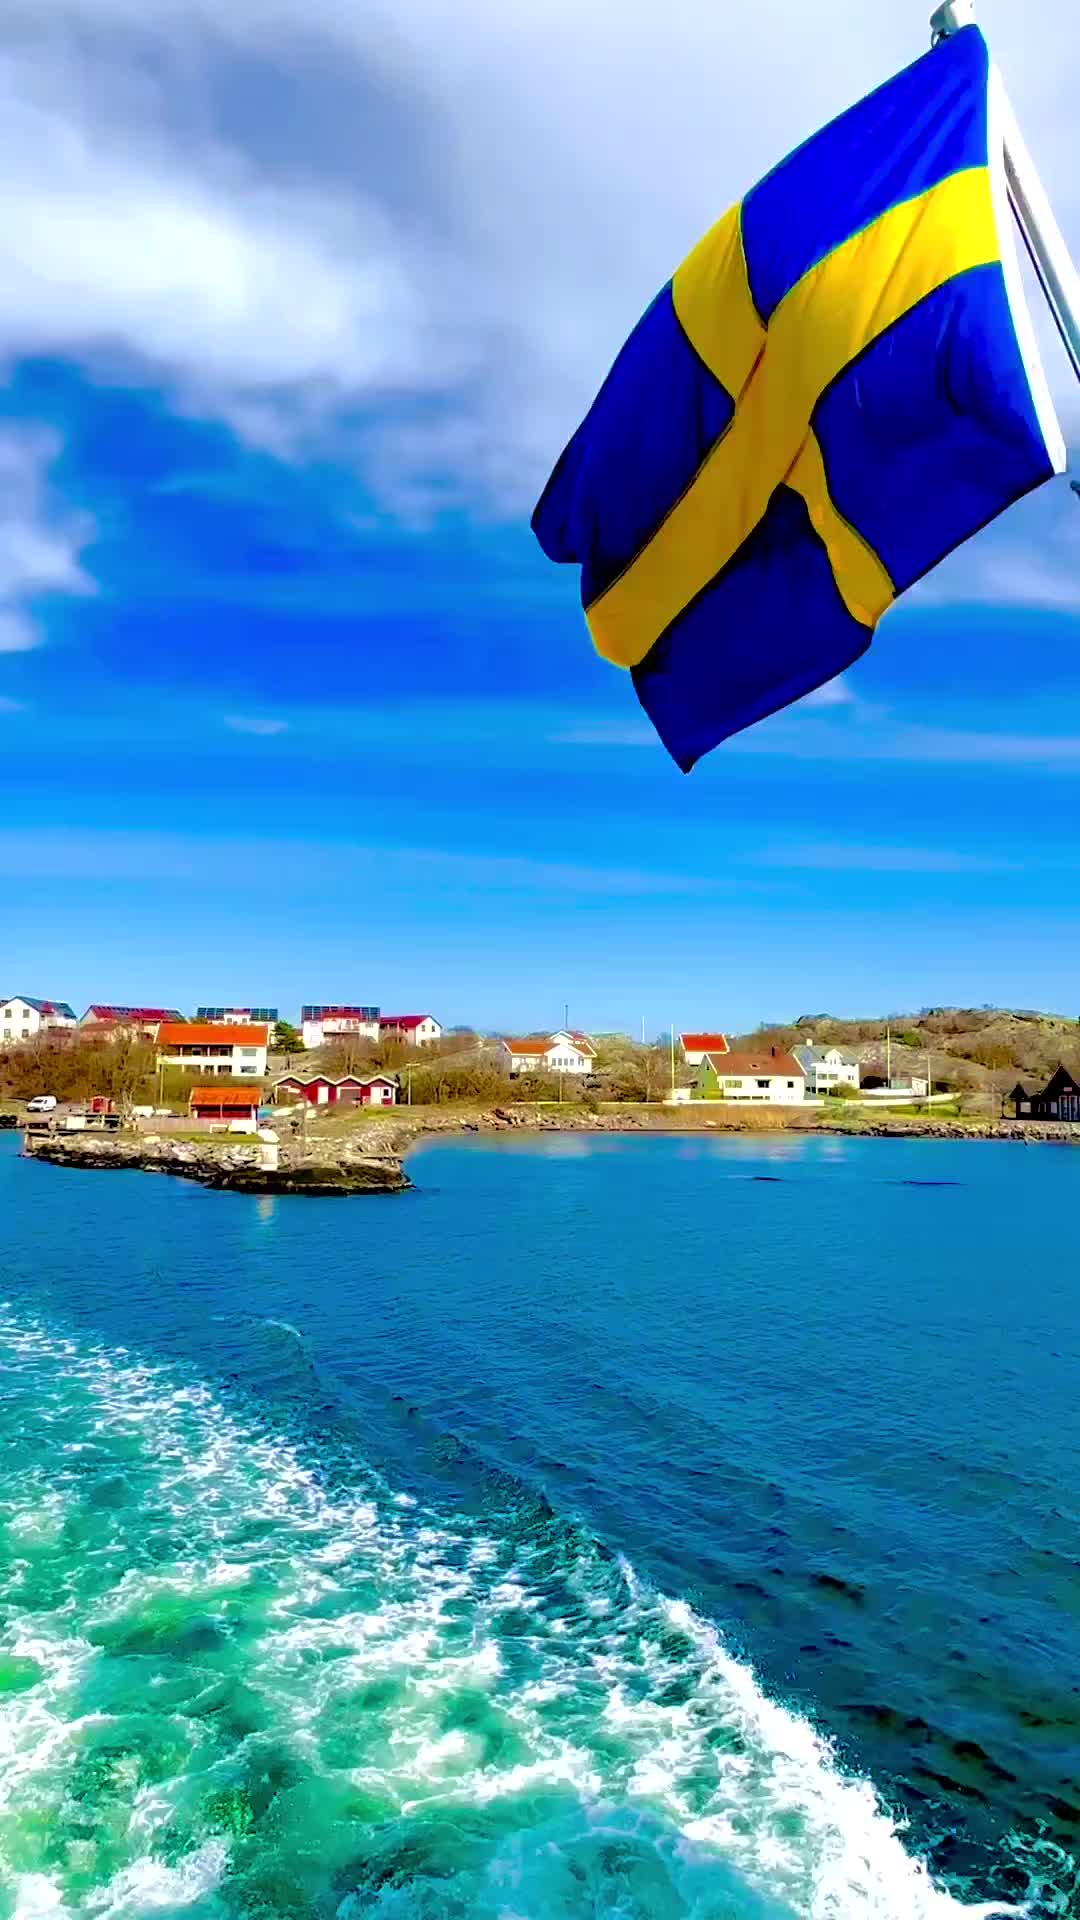 👇BEAUTIFUL SCANDINAVIAN DESTINATION👇

🌸GOTHENBURG ARCHIPELAGO, SWEDEN 🇸🇪 the largest Scandinavian country

🌸The Gothenburg Archipelago is group of islands easily reachable from the 2nd largest city in Sweden, Gothenburg. 

🌸Consisting of more than 20 islands, All with their own unique charm, dotting Sweden's western coastline.

🌸This Island which I explored is  DONSÖ Island, A Car Free fishing village island

🌸Known for its natural beauty, a walking friendly & swimming paradise

🌸Boat Transport to this island is covered by Gothenburg zone A 

📌save this for your Scandinavian/Nordic Trip
 
#syifainnordic #scandinavia #scandinavian #nordic #nordicsweden #vastsverige #sverige🇸🇪 #sverige #sweden #sweden🇸🇪 #göteborg #goteborgcom #stockholm #oslo #denmark #visitsweden #thisisgbg #göthenburg #gothenburg #allavisomalskargoteborg #gothenburg_sweden #igersgothenburg #gothenburgarchipelago #donsö #hönö #westsweden #sweden_photolovers